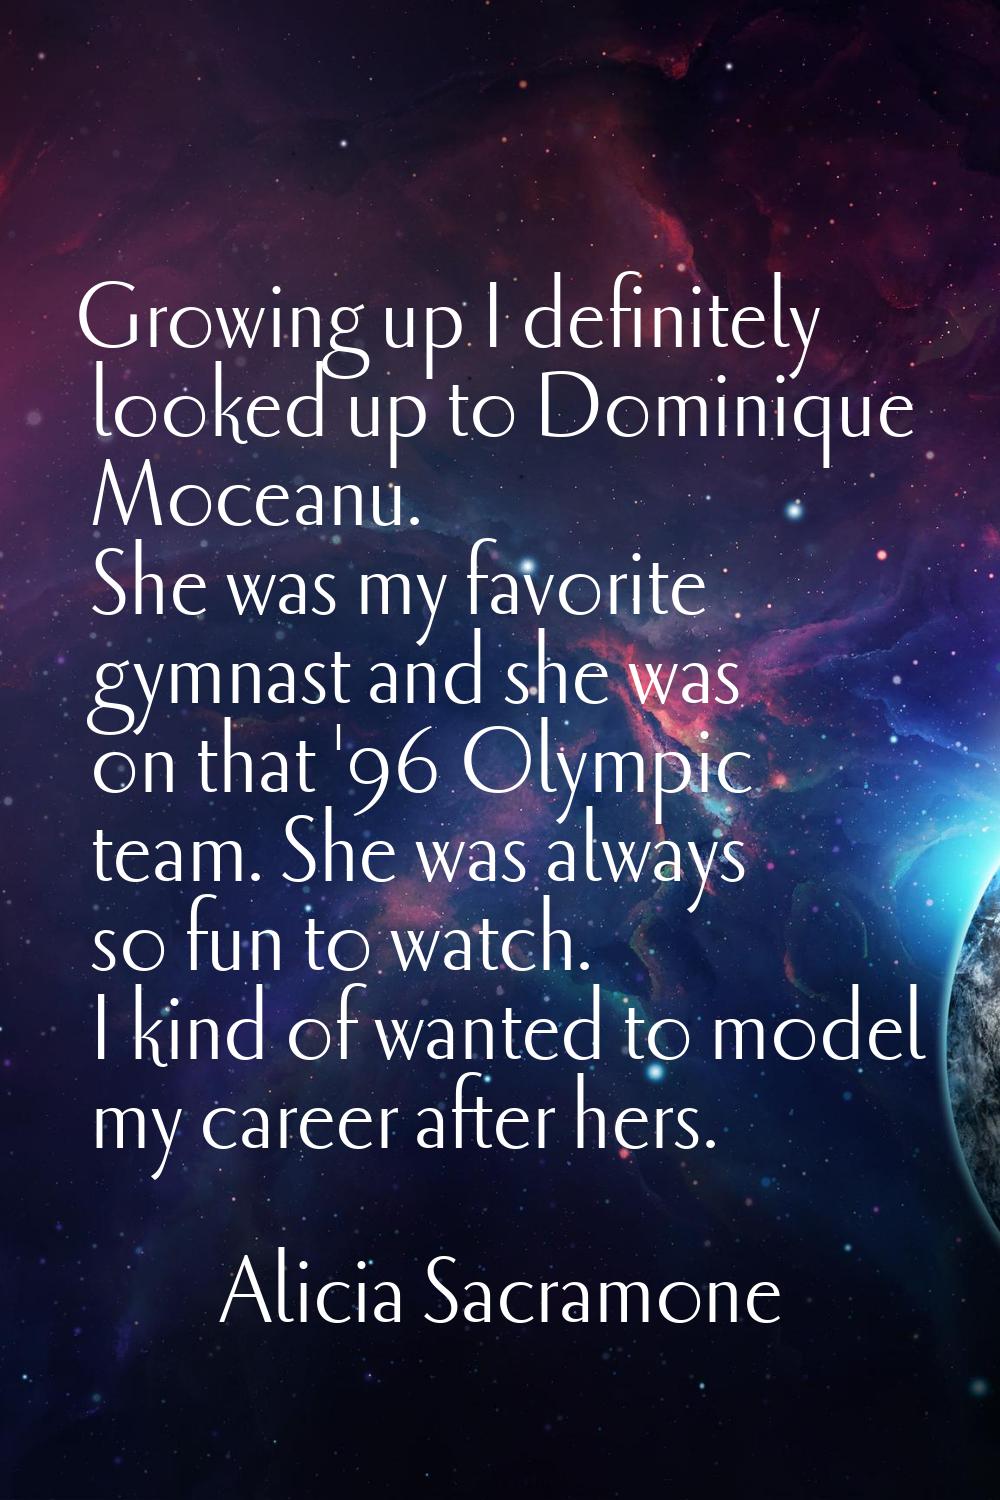 Growing up I definitely looked up to Dominique Moceanu. She was my favorite gymnast and she was on 